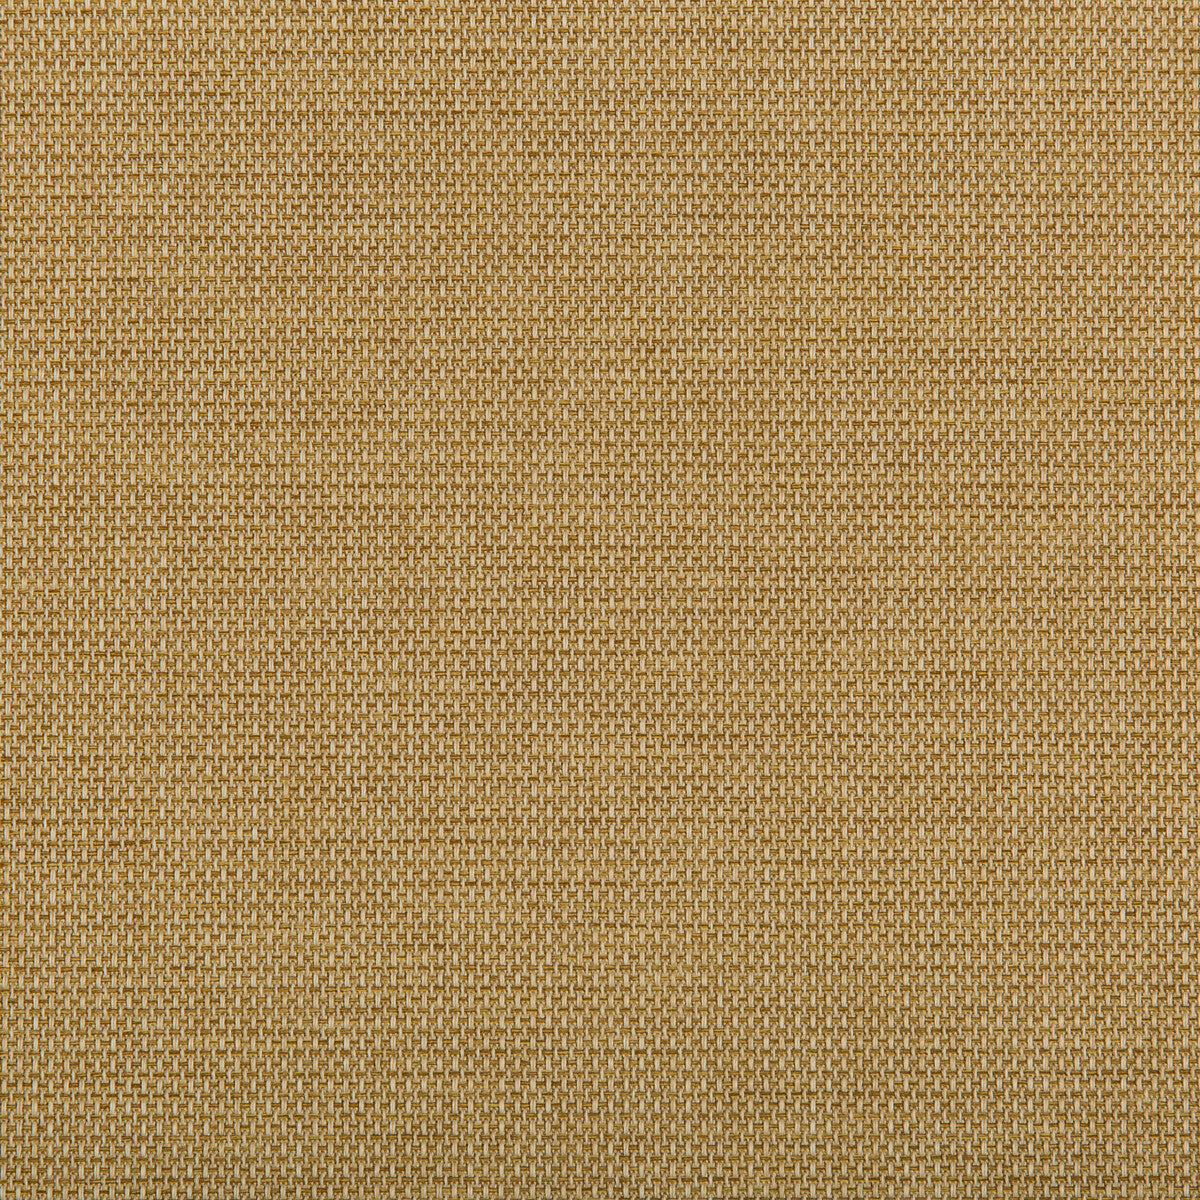 Kravet Contract fabric in 4645-416 color - pattern 4645.416.0 - by Kravet Contract